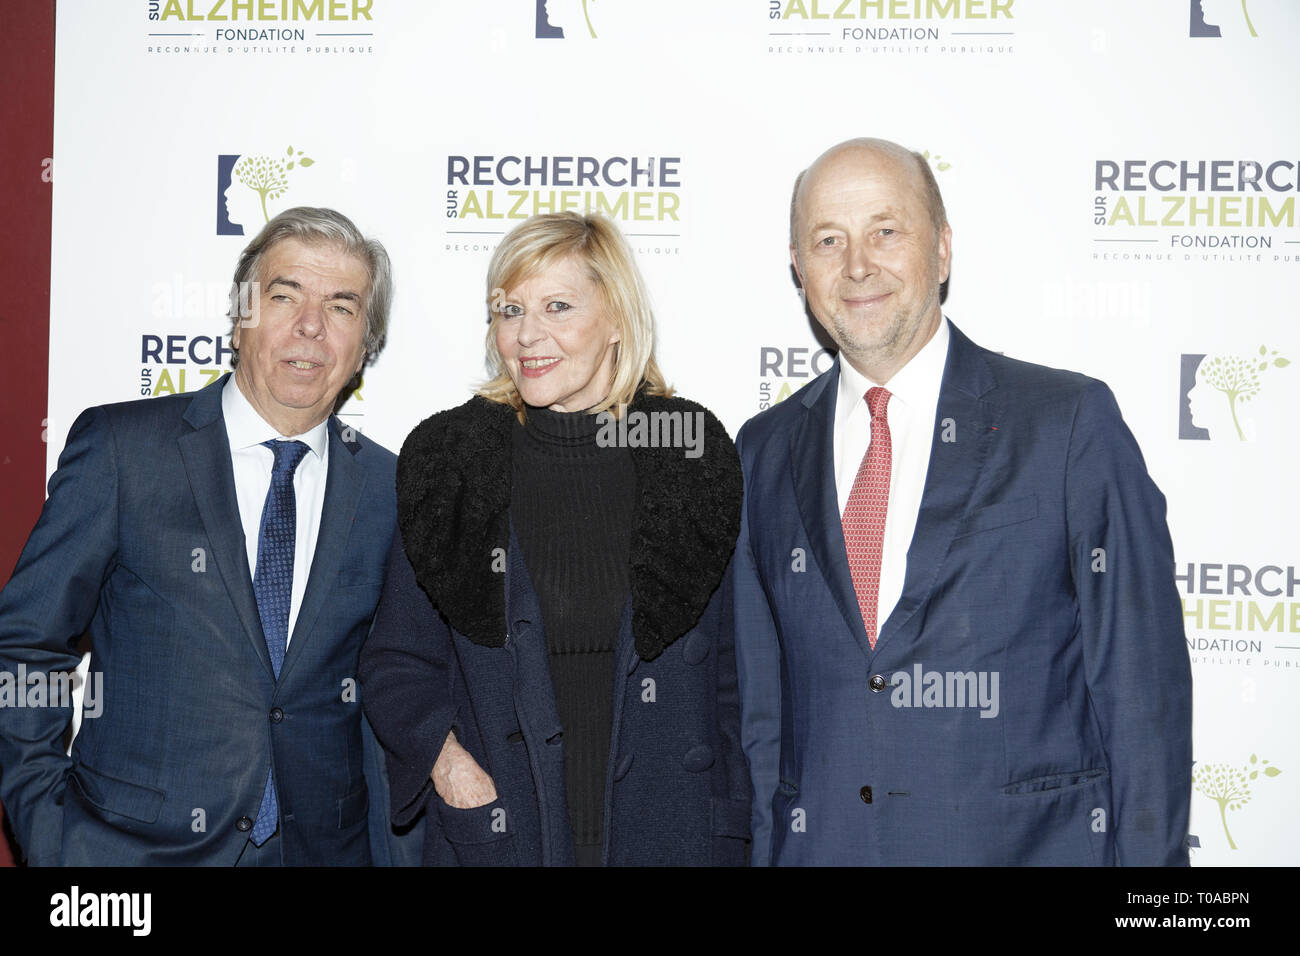 Paris, France. 18th Mar 2019. Pr Bruno Dubois(L), Chantal Ladesou and Olivier De Ladoucette(R) - Photocall of the 14th Gala 2019 of the Association for Alzheimer Research at the Olympia in Paris on March 18, 2019 Credit: Véronique PHITOUSSI/Alamy Live News Stock Photo